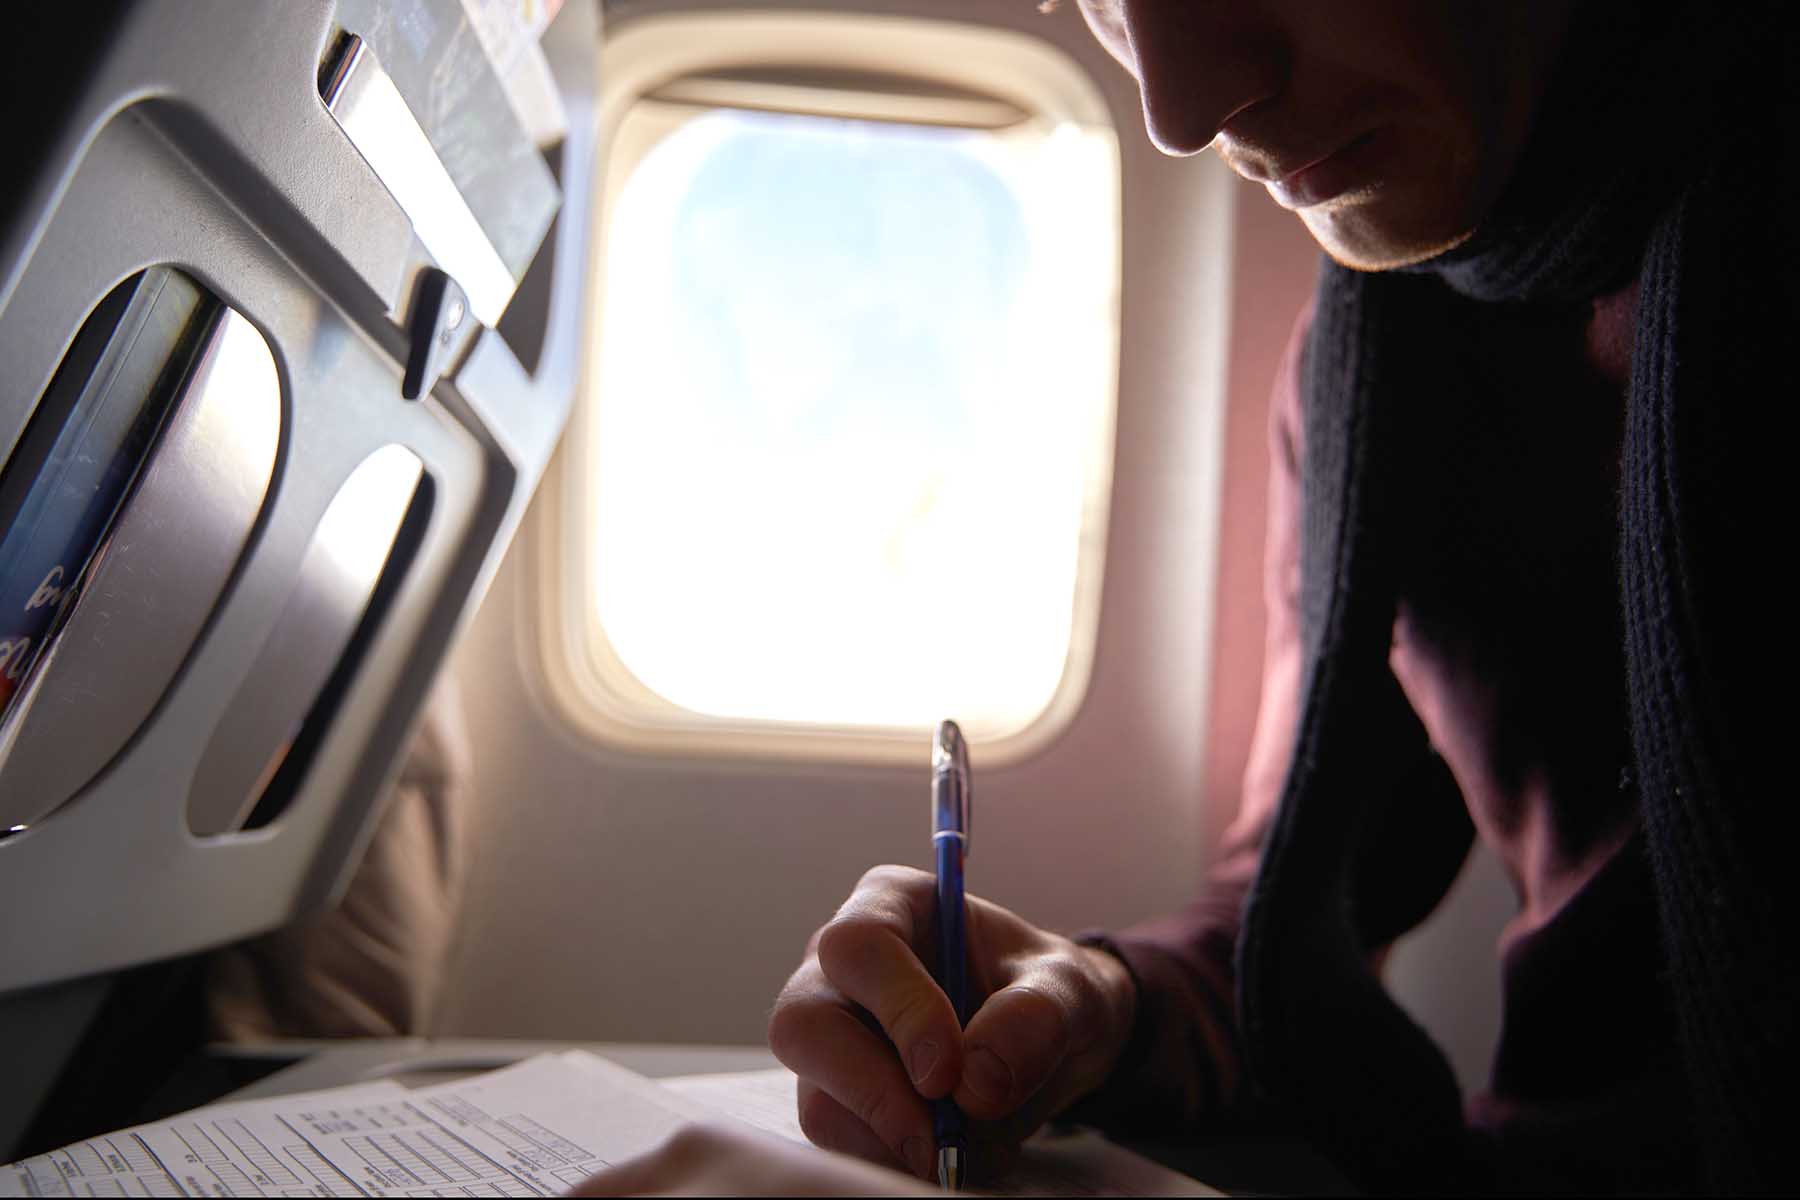 Man filling out information on an immigration form, while still on the plane.